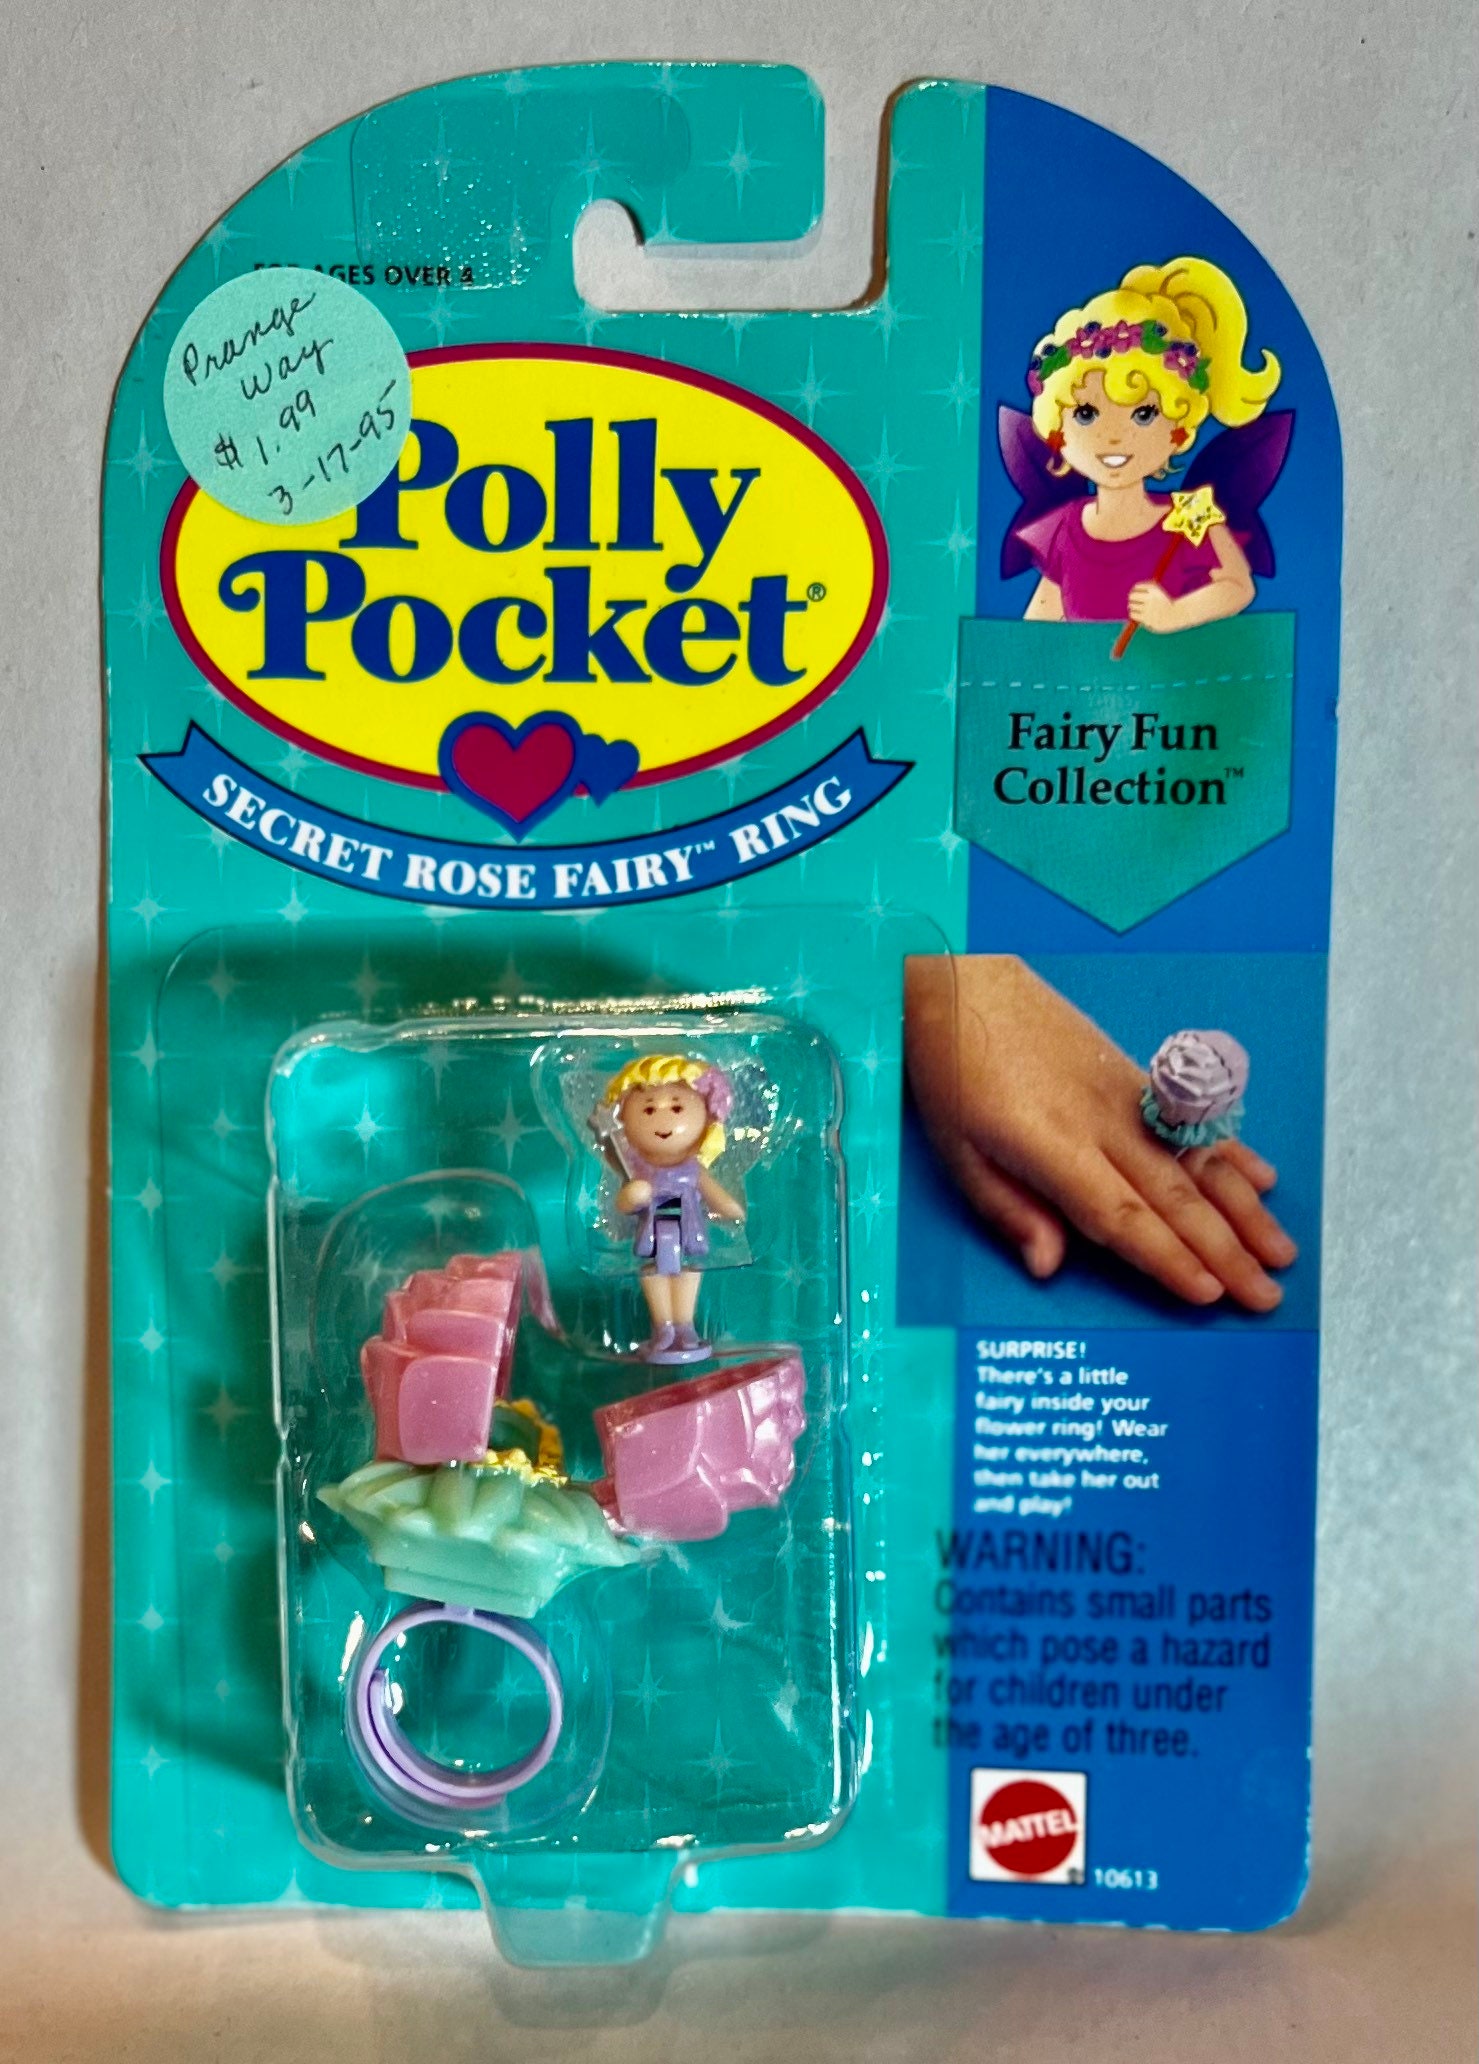 1994 Polly Pocket Fairy Fun Collection secret Rose Fairy Ring. New in  Original Pkg. 